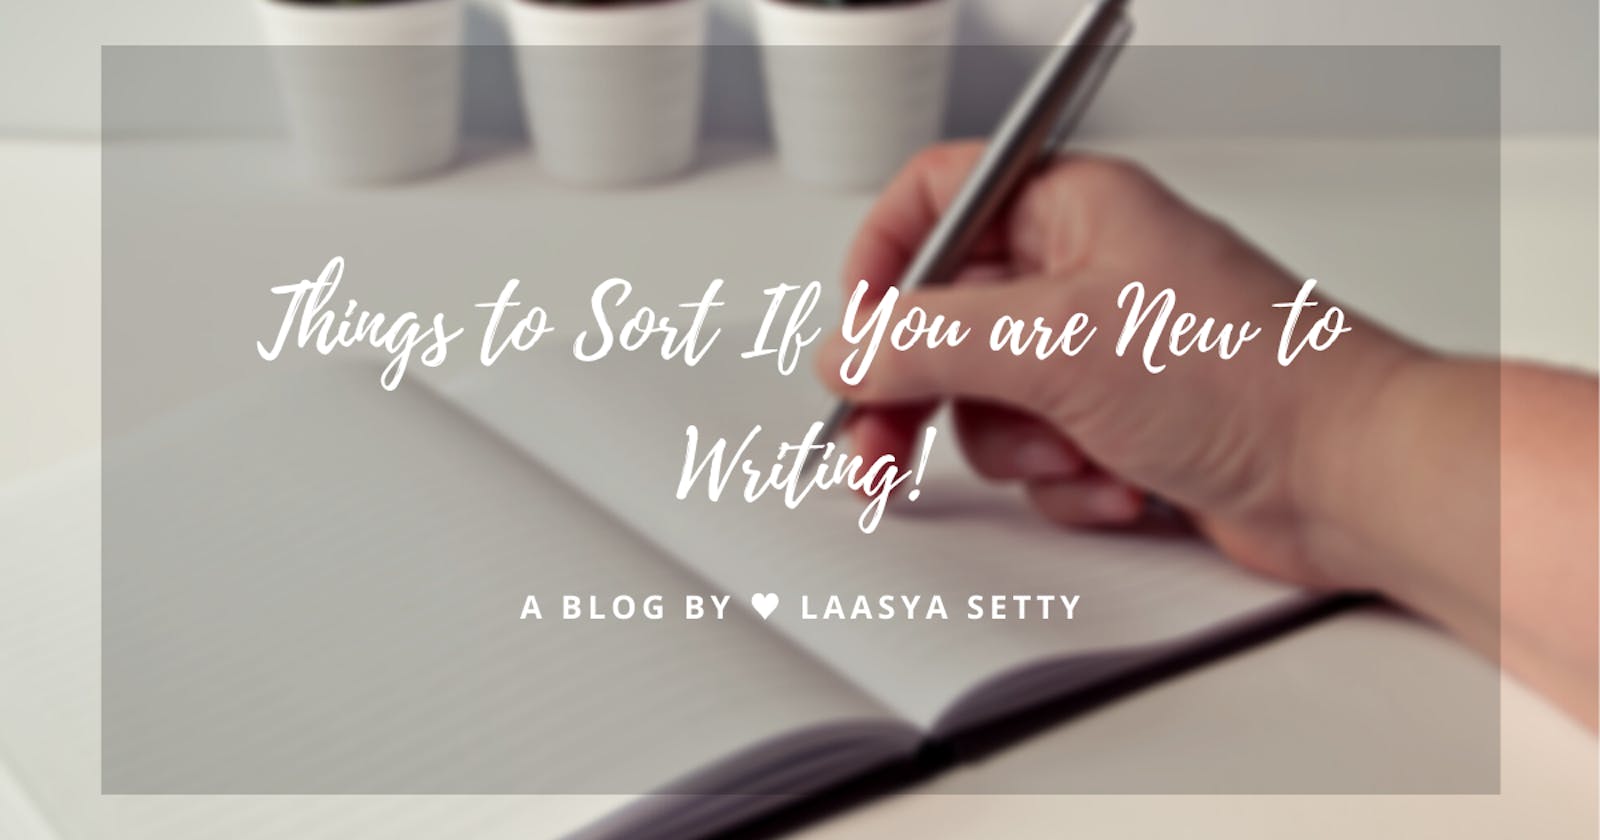 Things to Sort If You are New to Writing!